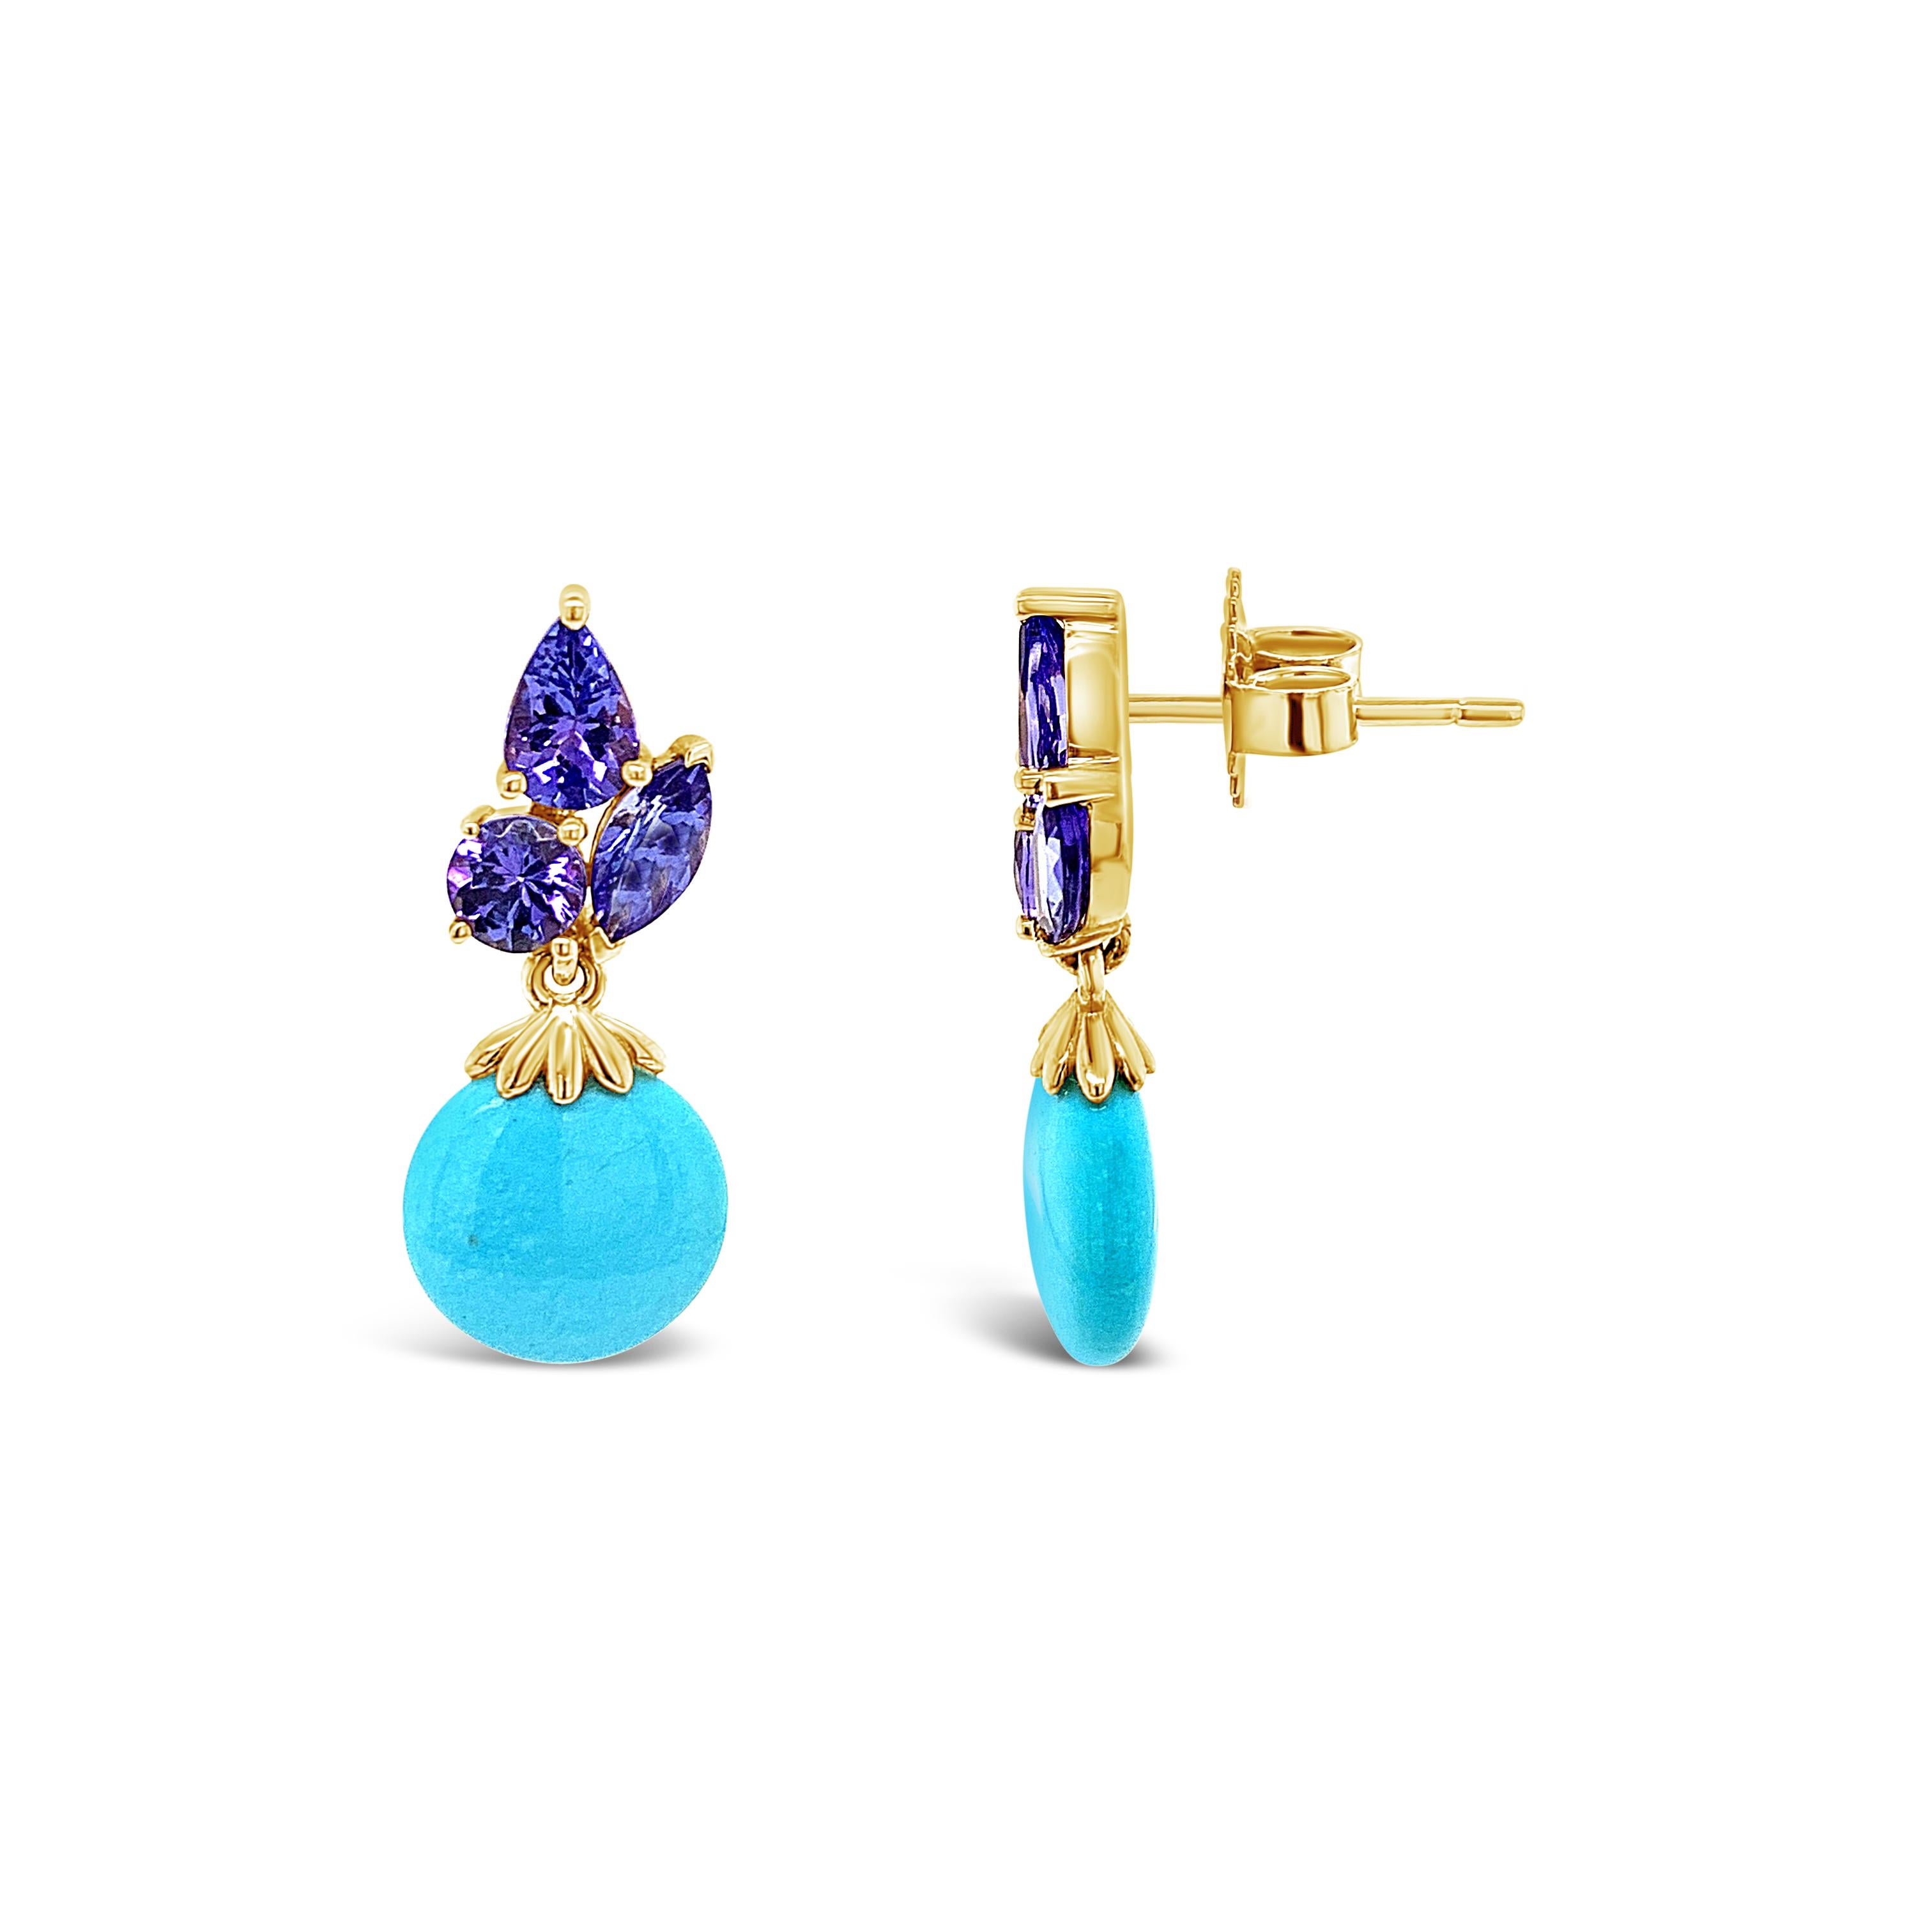 Carlo Viani® Earrings featuring 1 5/8 cts. Blueberry Tanzanite®, cts. Robins Egg Blue Turquoise™, set in 14K Honey Gold™. Please feel free to reach out with any questions! Item comes with a Carlo Viani® suede pouch!
